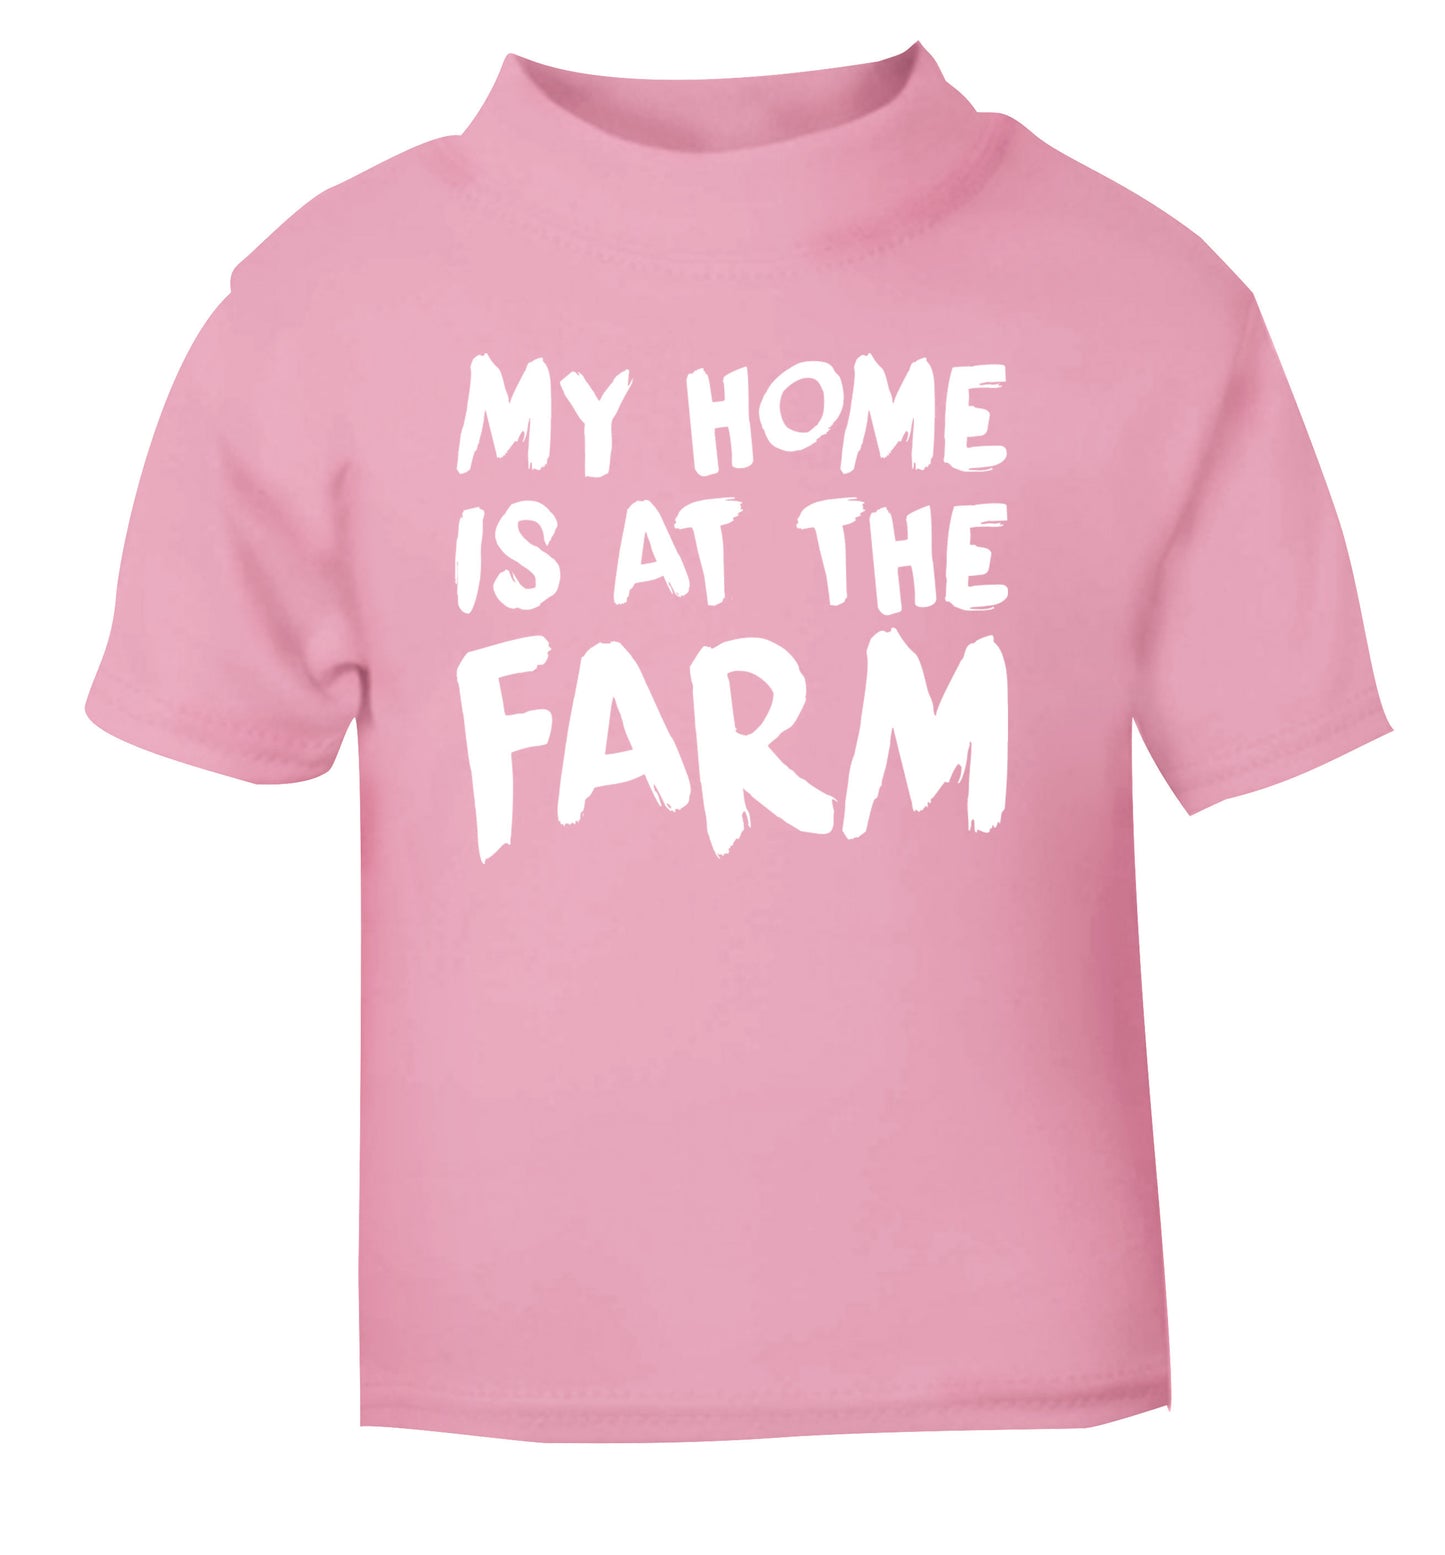 My home is at the farm light pink Baby Toddler Tshirt 2 Years